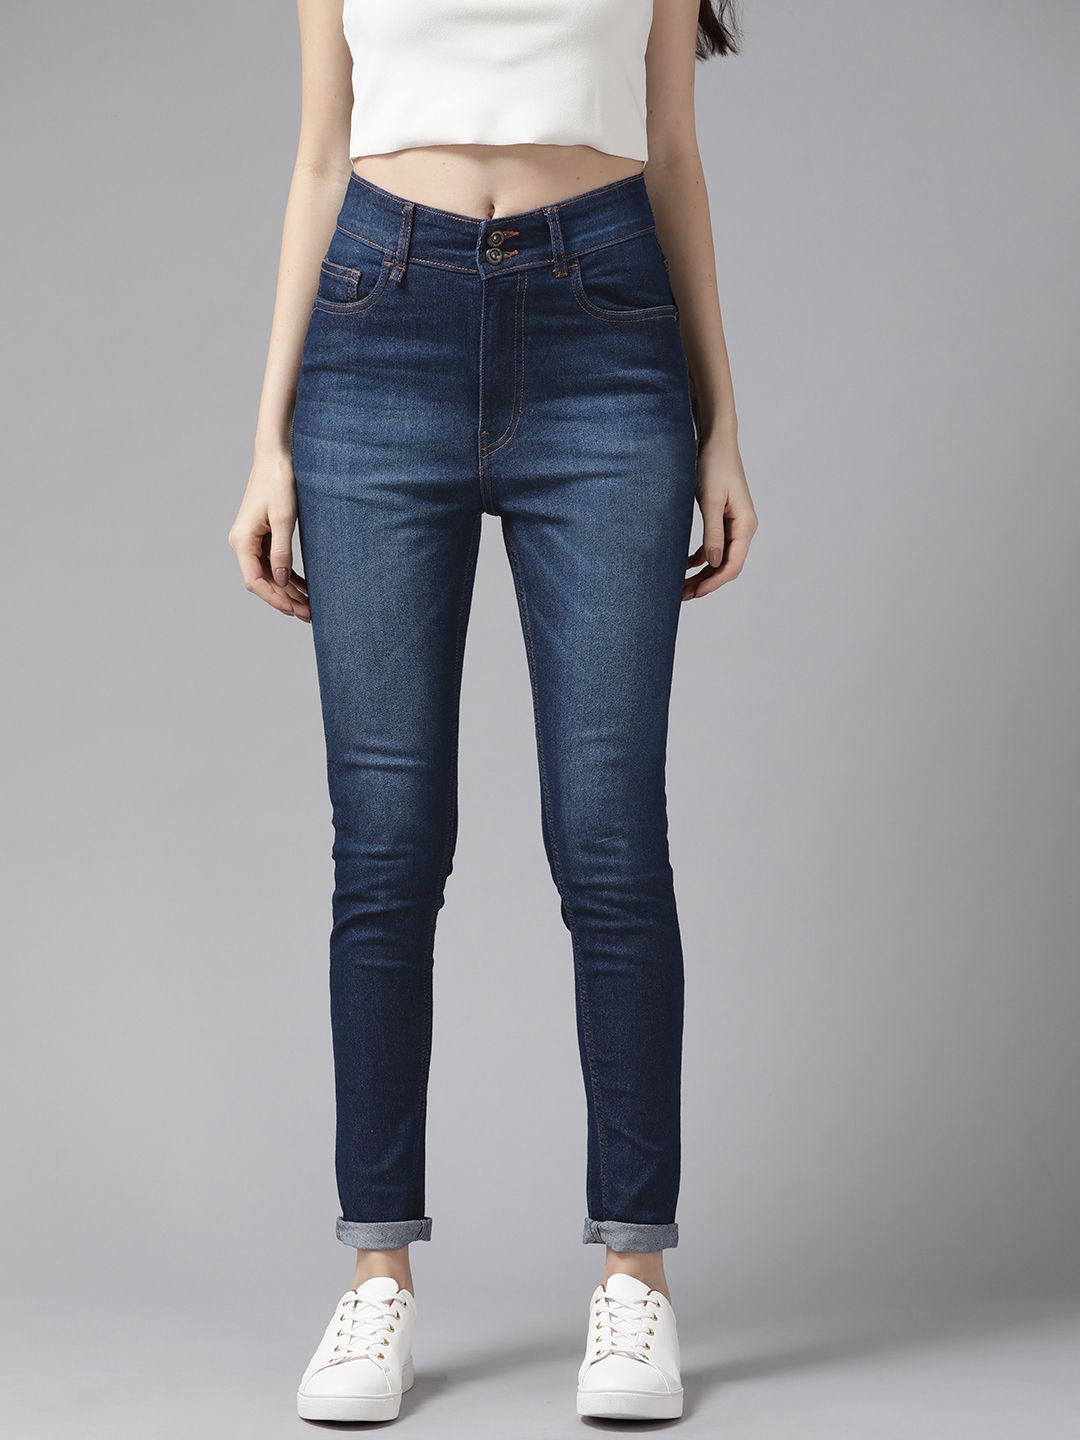 Roadster Women Navy Blue Super Skinny Fit High-Rise Light Fade Stretchable Jeans Price in India